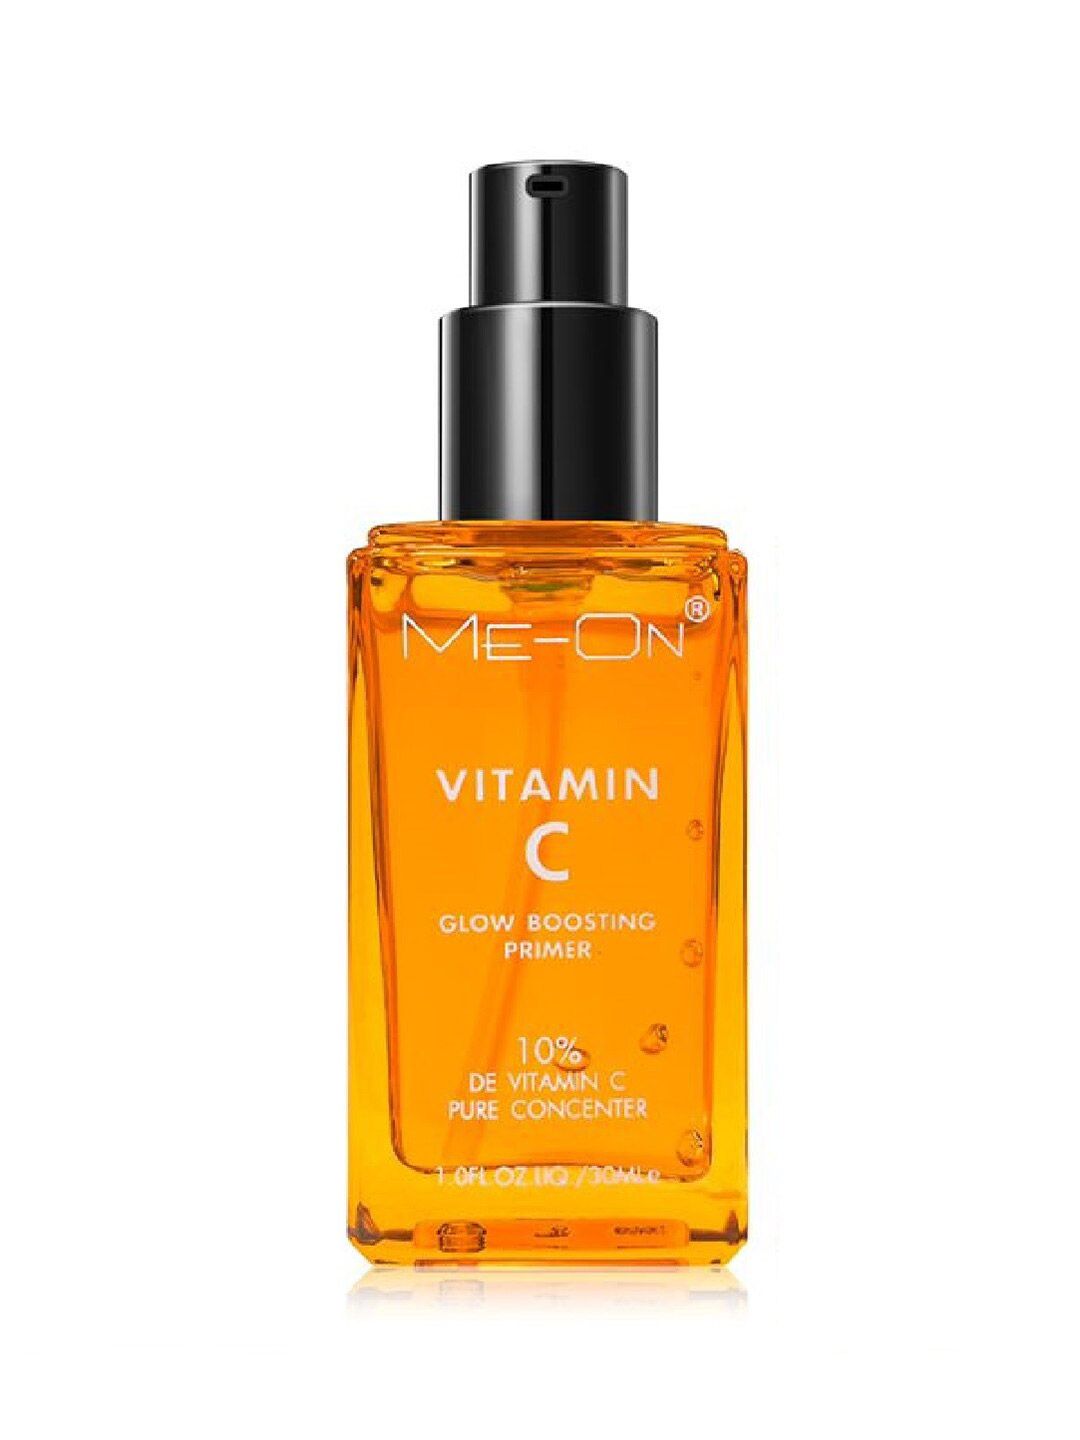 ME-ON Vitamin C Glow Boosting Face Primer for All Skin Types - 30ml Price in India